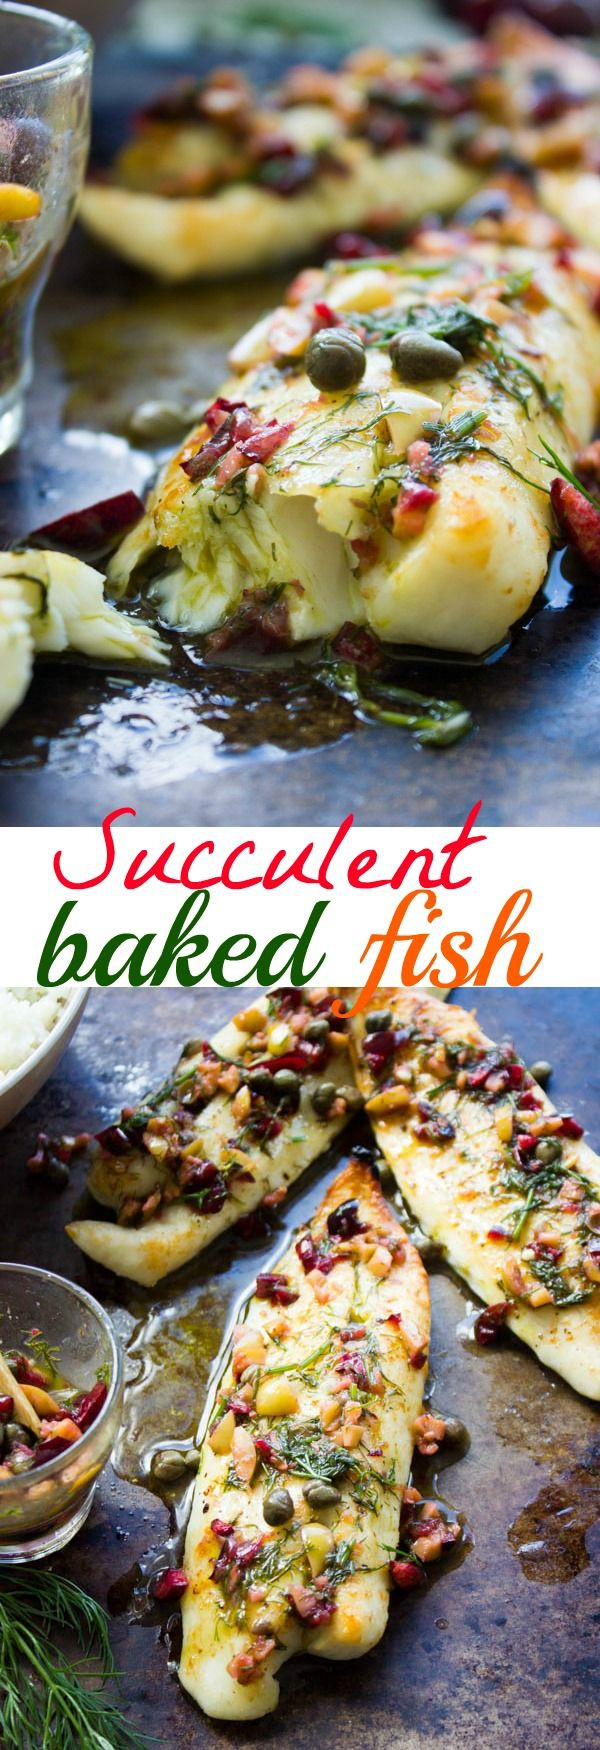 Baked Fish And Rice Recipes
 Baked Fish With Dill Cherry Salsa And Lemon Cauliflower